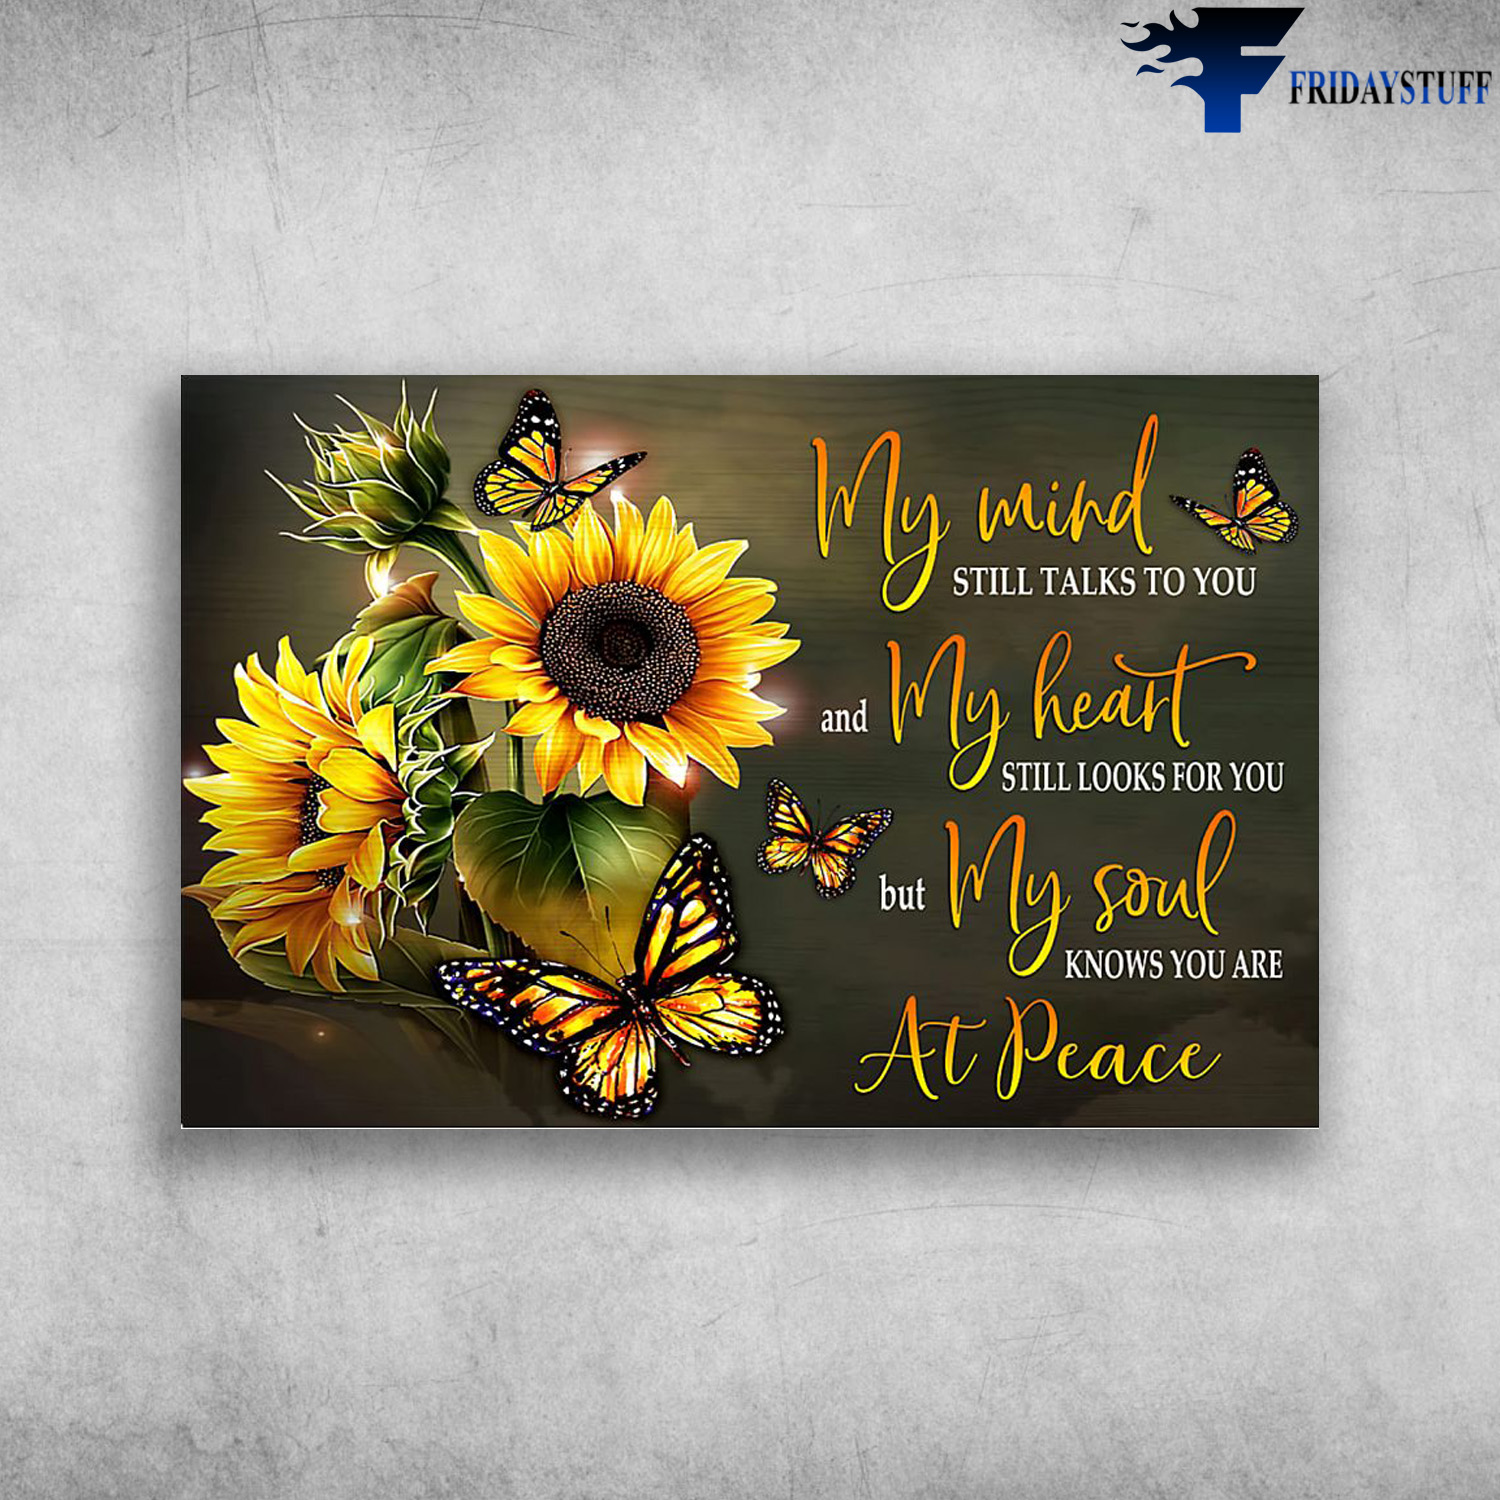 Sunflower And Butterflies - My Mind Still Talks To You, And My Heart Still Looks For You, But My Soul Knows You Are At Peace